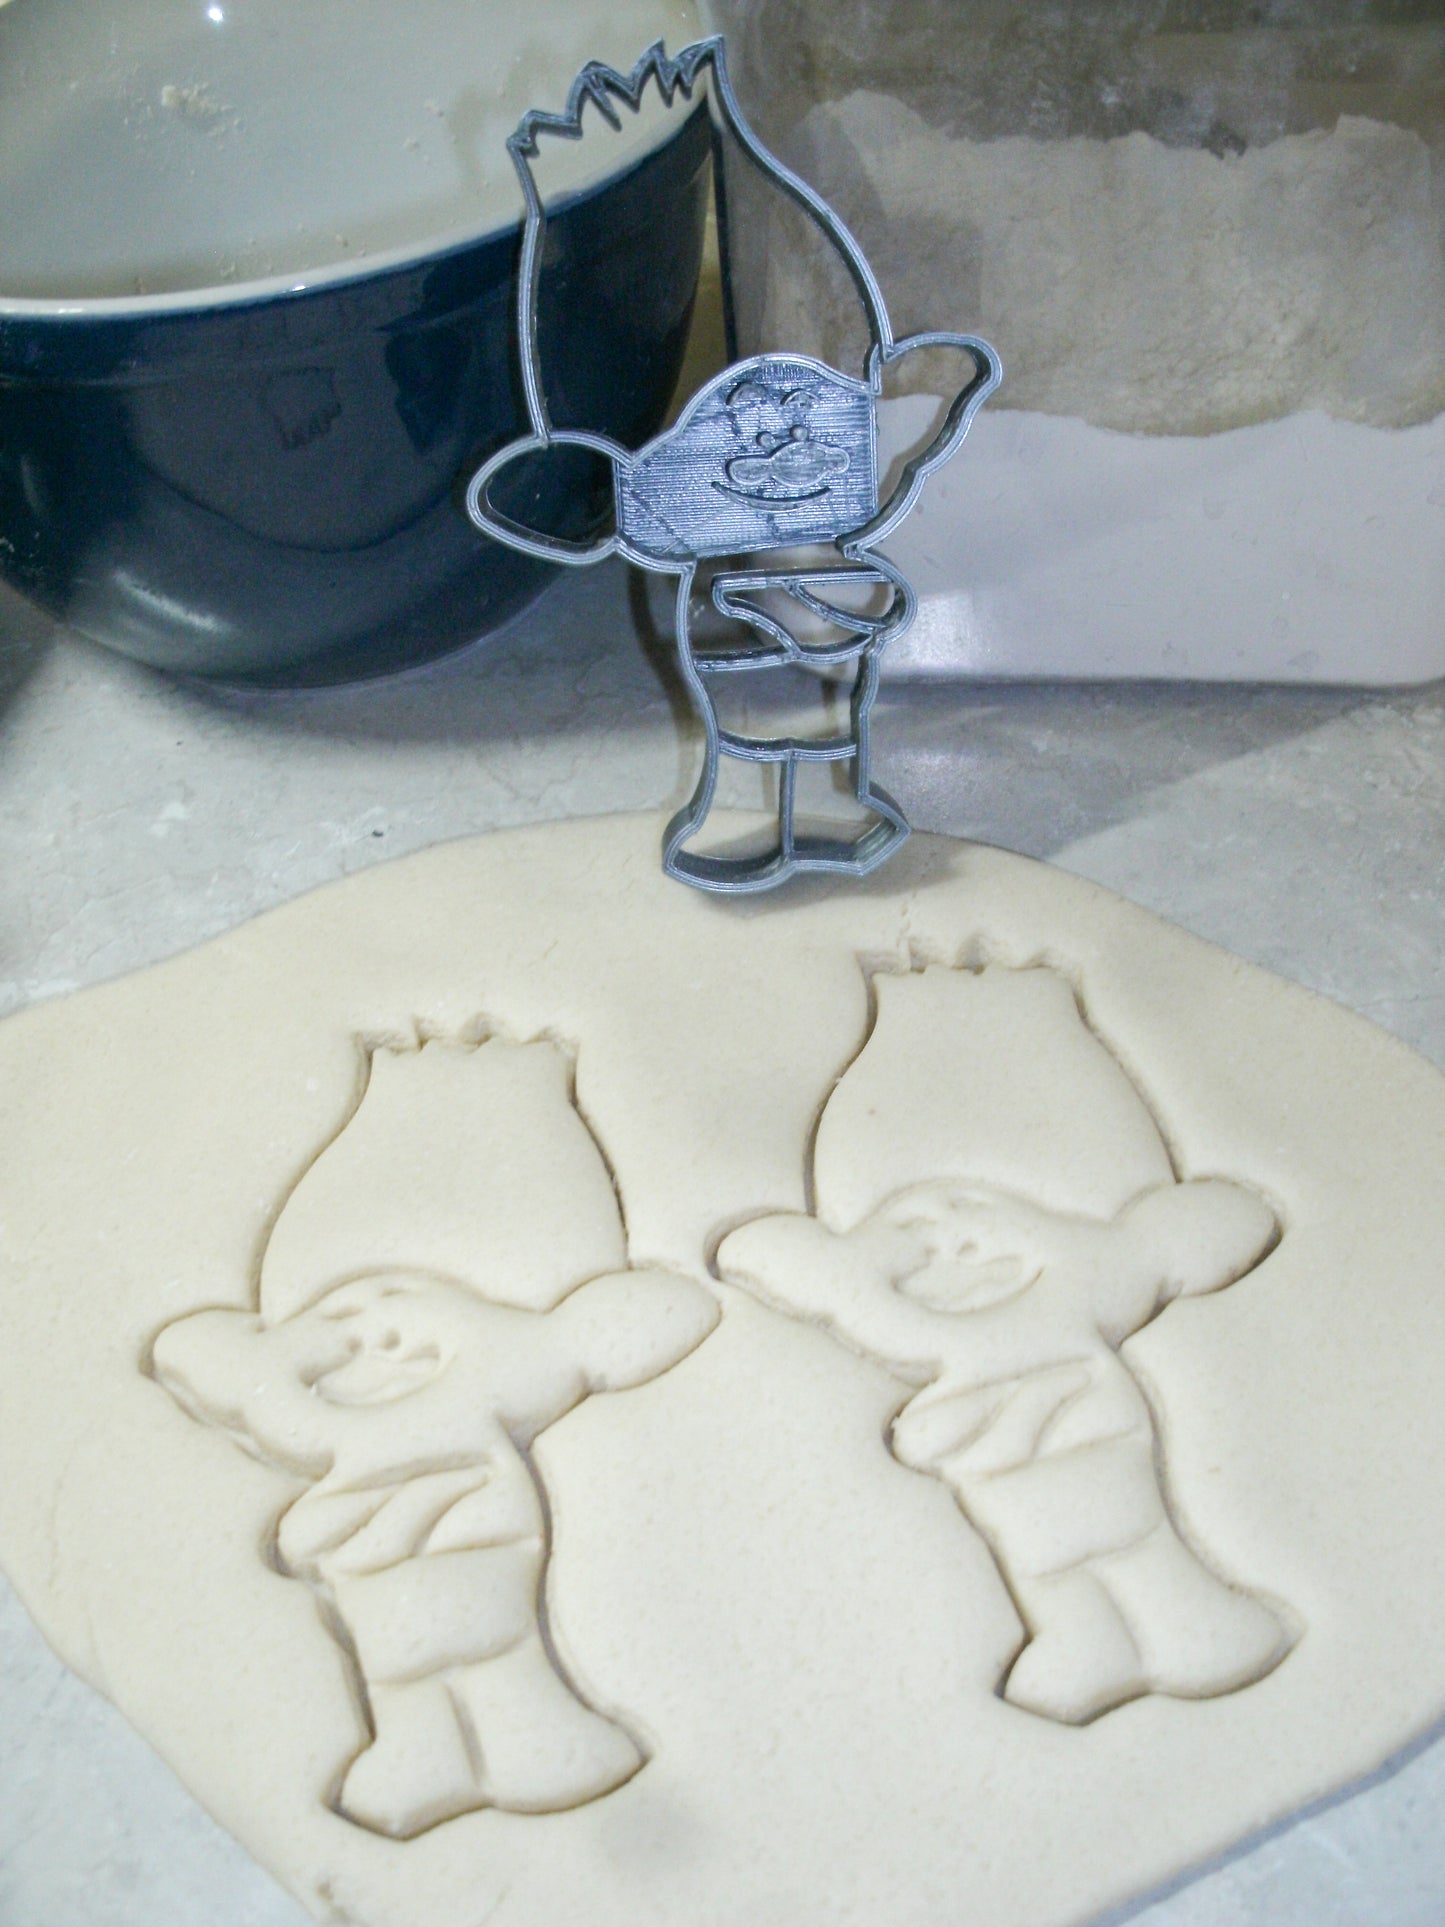 Branch Practical Trolls Movie Character Cookie Cutter Made In USA PR2004